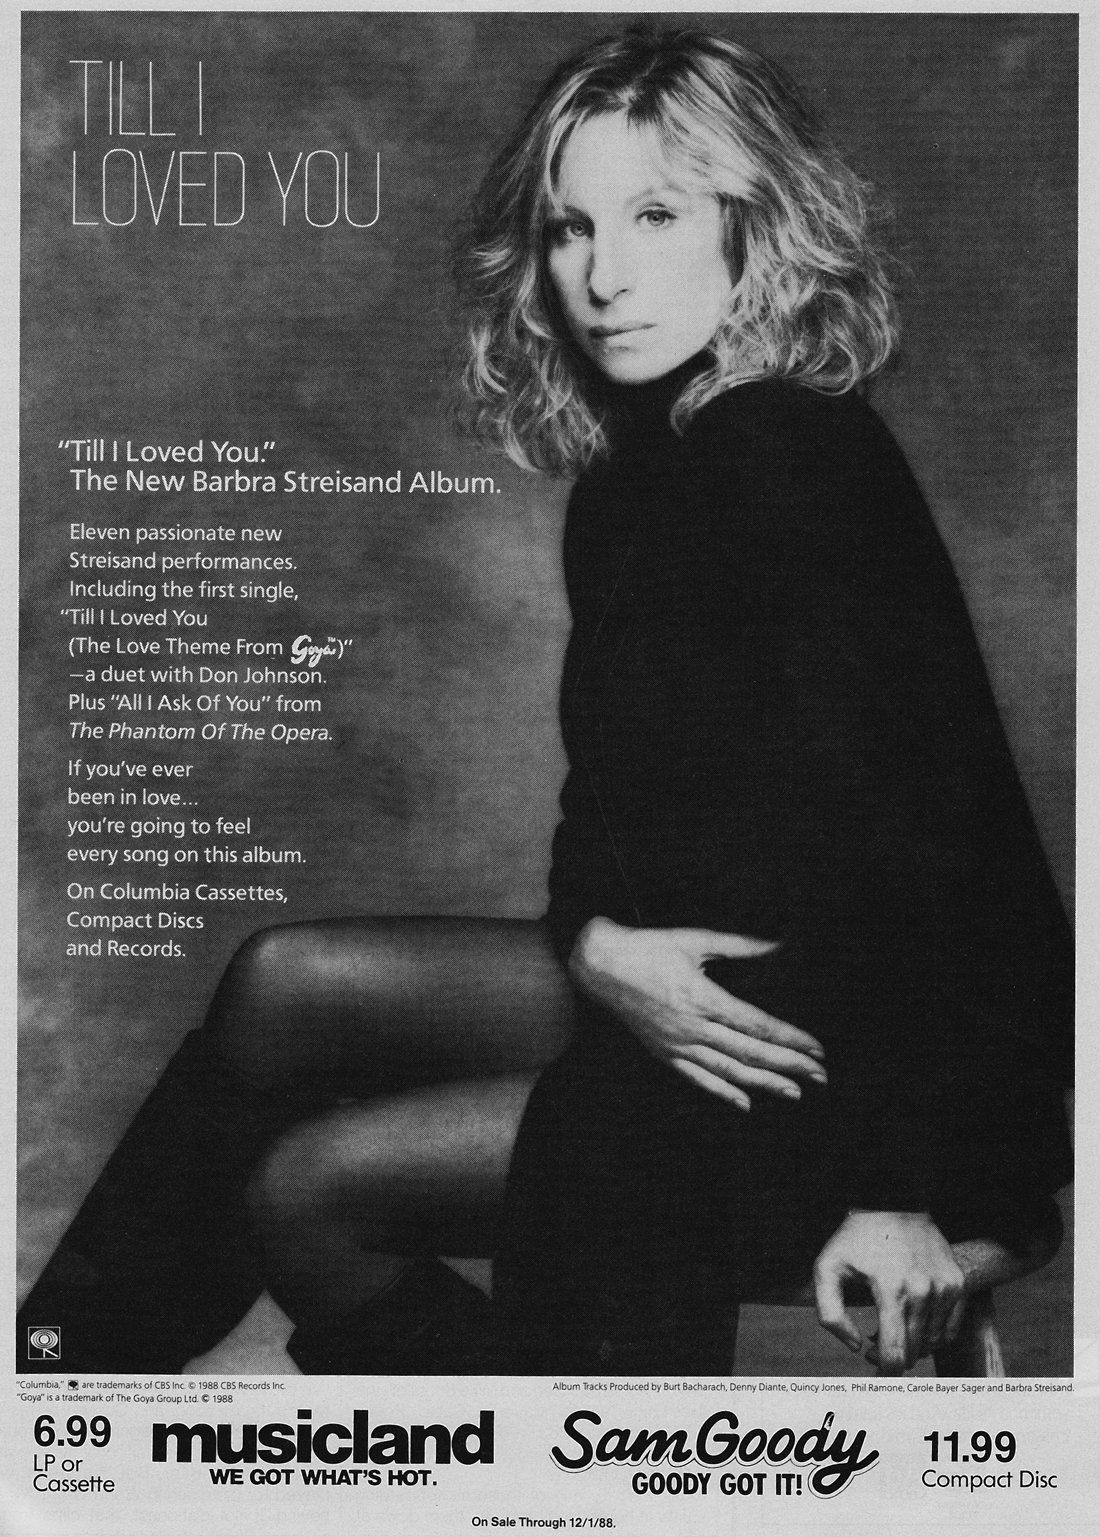 Musicland and Sam Goody record store ad for the Streisand Album Till I Loved You